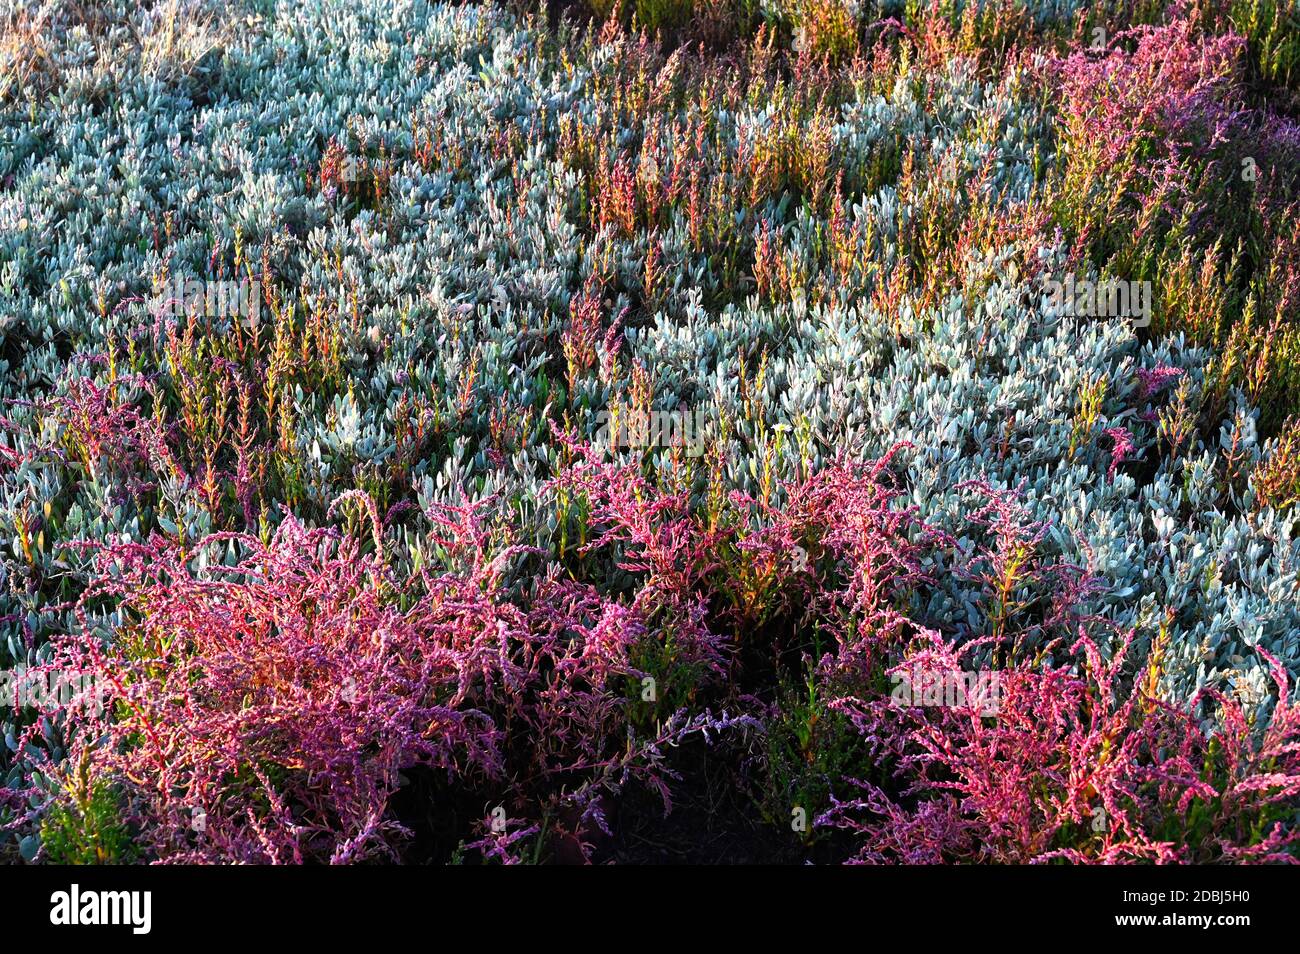 Sea Lavender and various beautiful coloured heathers growing wild in the sand dunes behind the beach at Walberswick, Suffolk, England, United Kingdom Stock Photo